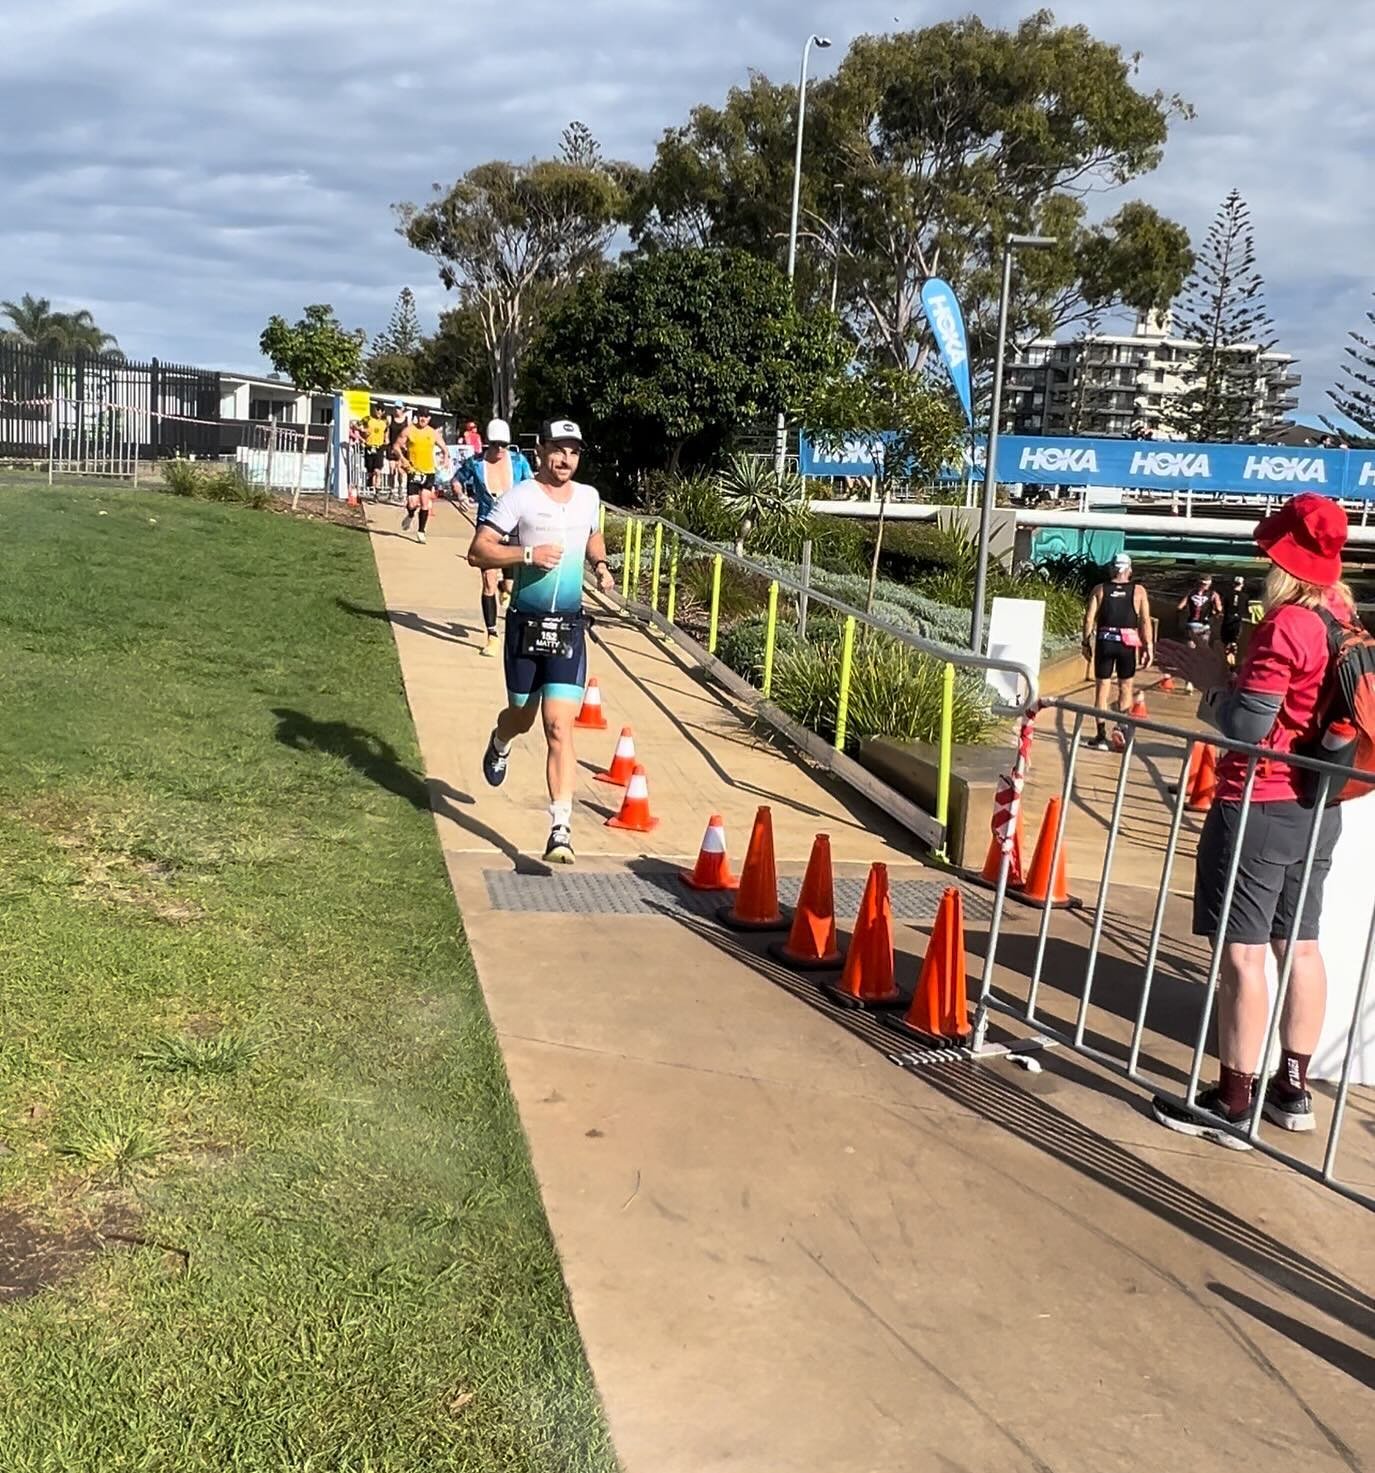 Matty . Mr. C 
Solid work on the day , shaving 27 minutes from Ironman New Zealand in 2023. A few bumps along the way a few weeks pre race , but focused back on and got the job done with a PB. Onwards mate 👌👍.